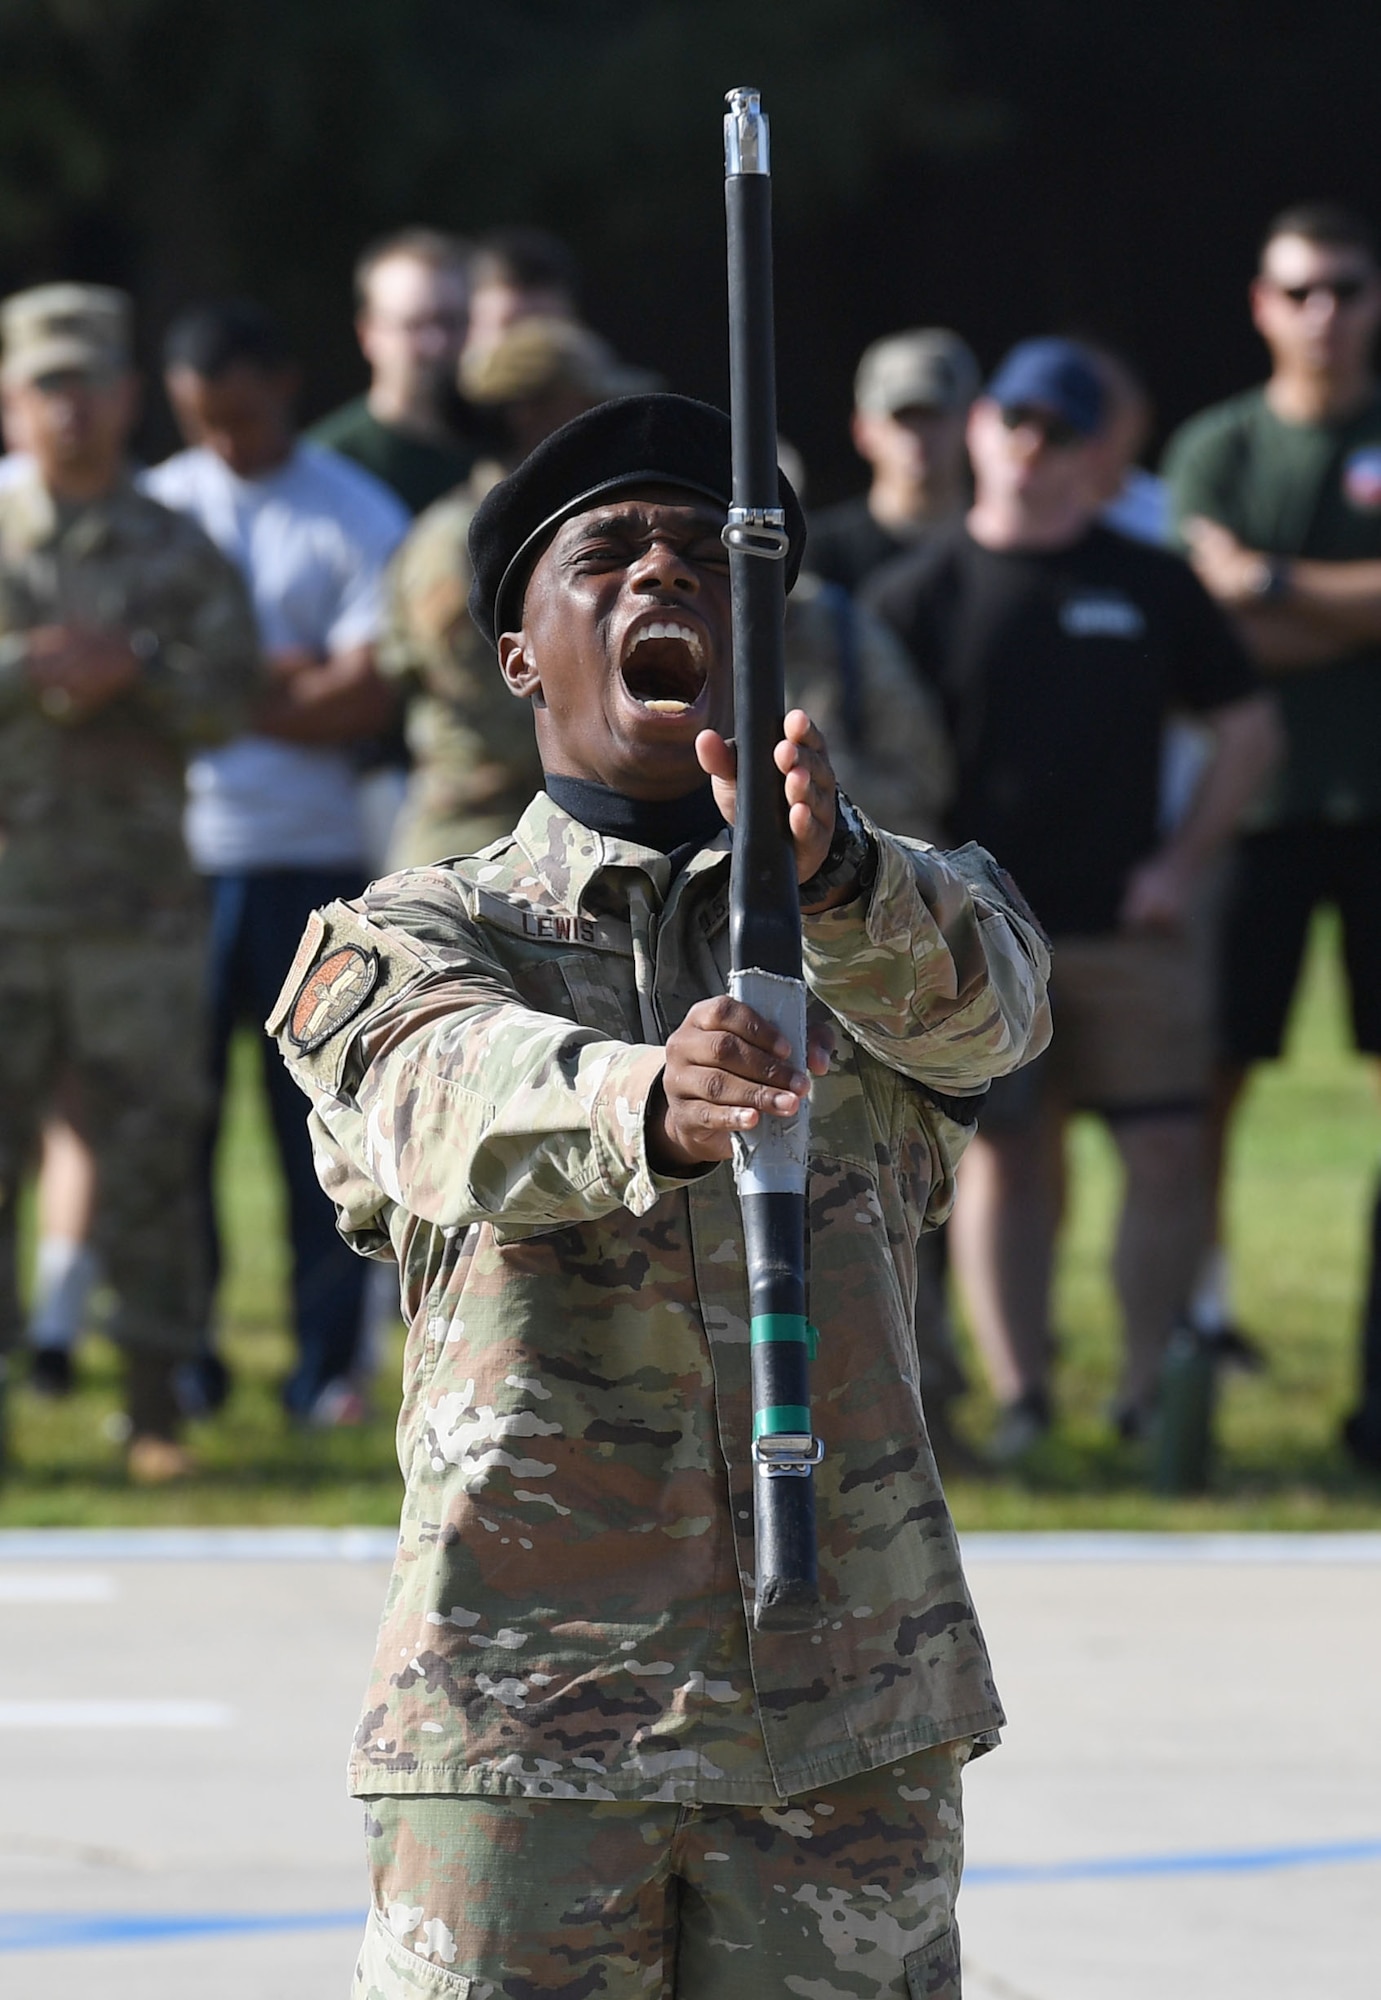 A member of the 334th Training Squadron freestyle drill team performs during the 81st Training Group drill down on the Levitow Training Support Facility drill pad at Keesler Air Force Base, Mississippi, Sept. 16, 2022. Keesler trains more than 30,000 students each year. While in training, Airmen are given the opportunity to volunteer to learn and execute drill down routines. (U.S. Air Force photo by Kemberly Groue)